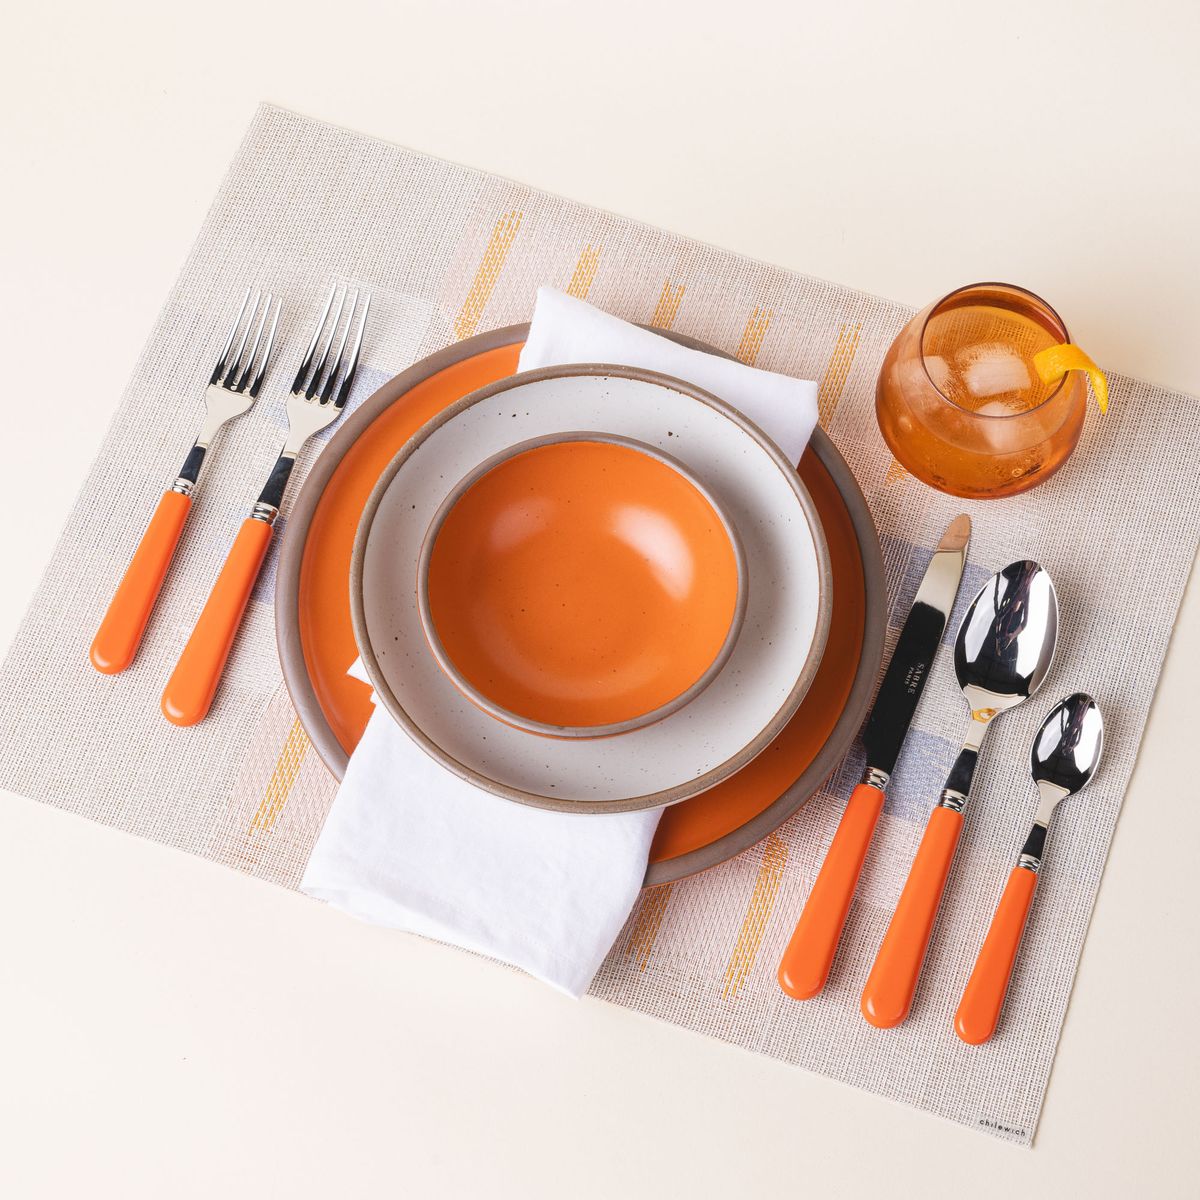 A place setting with a placemat with a soft artful geometric design featuring neutral, orange, white, and blue colors, ceramic bold orange bowls and plates, orange flatware, and an orange whiskey snifter.